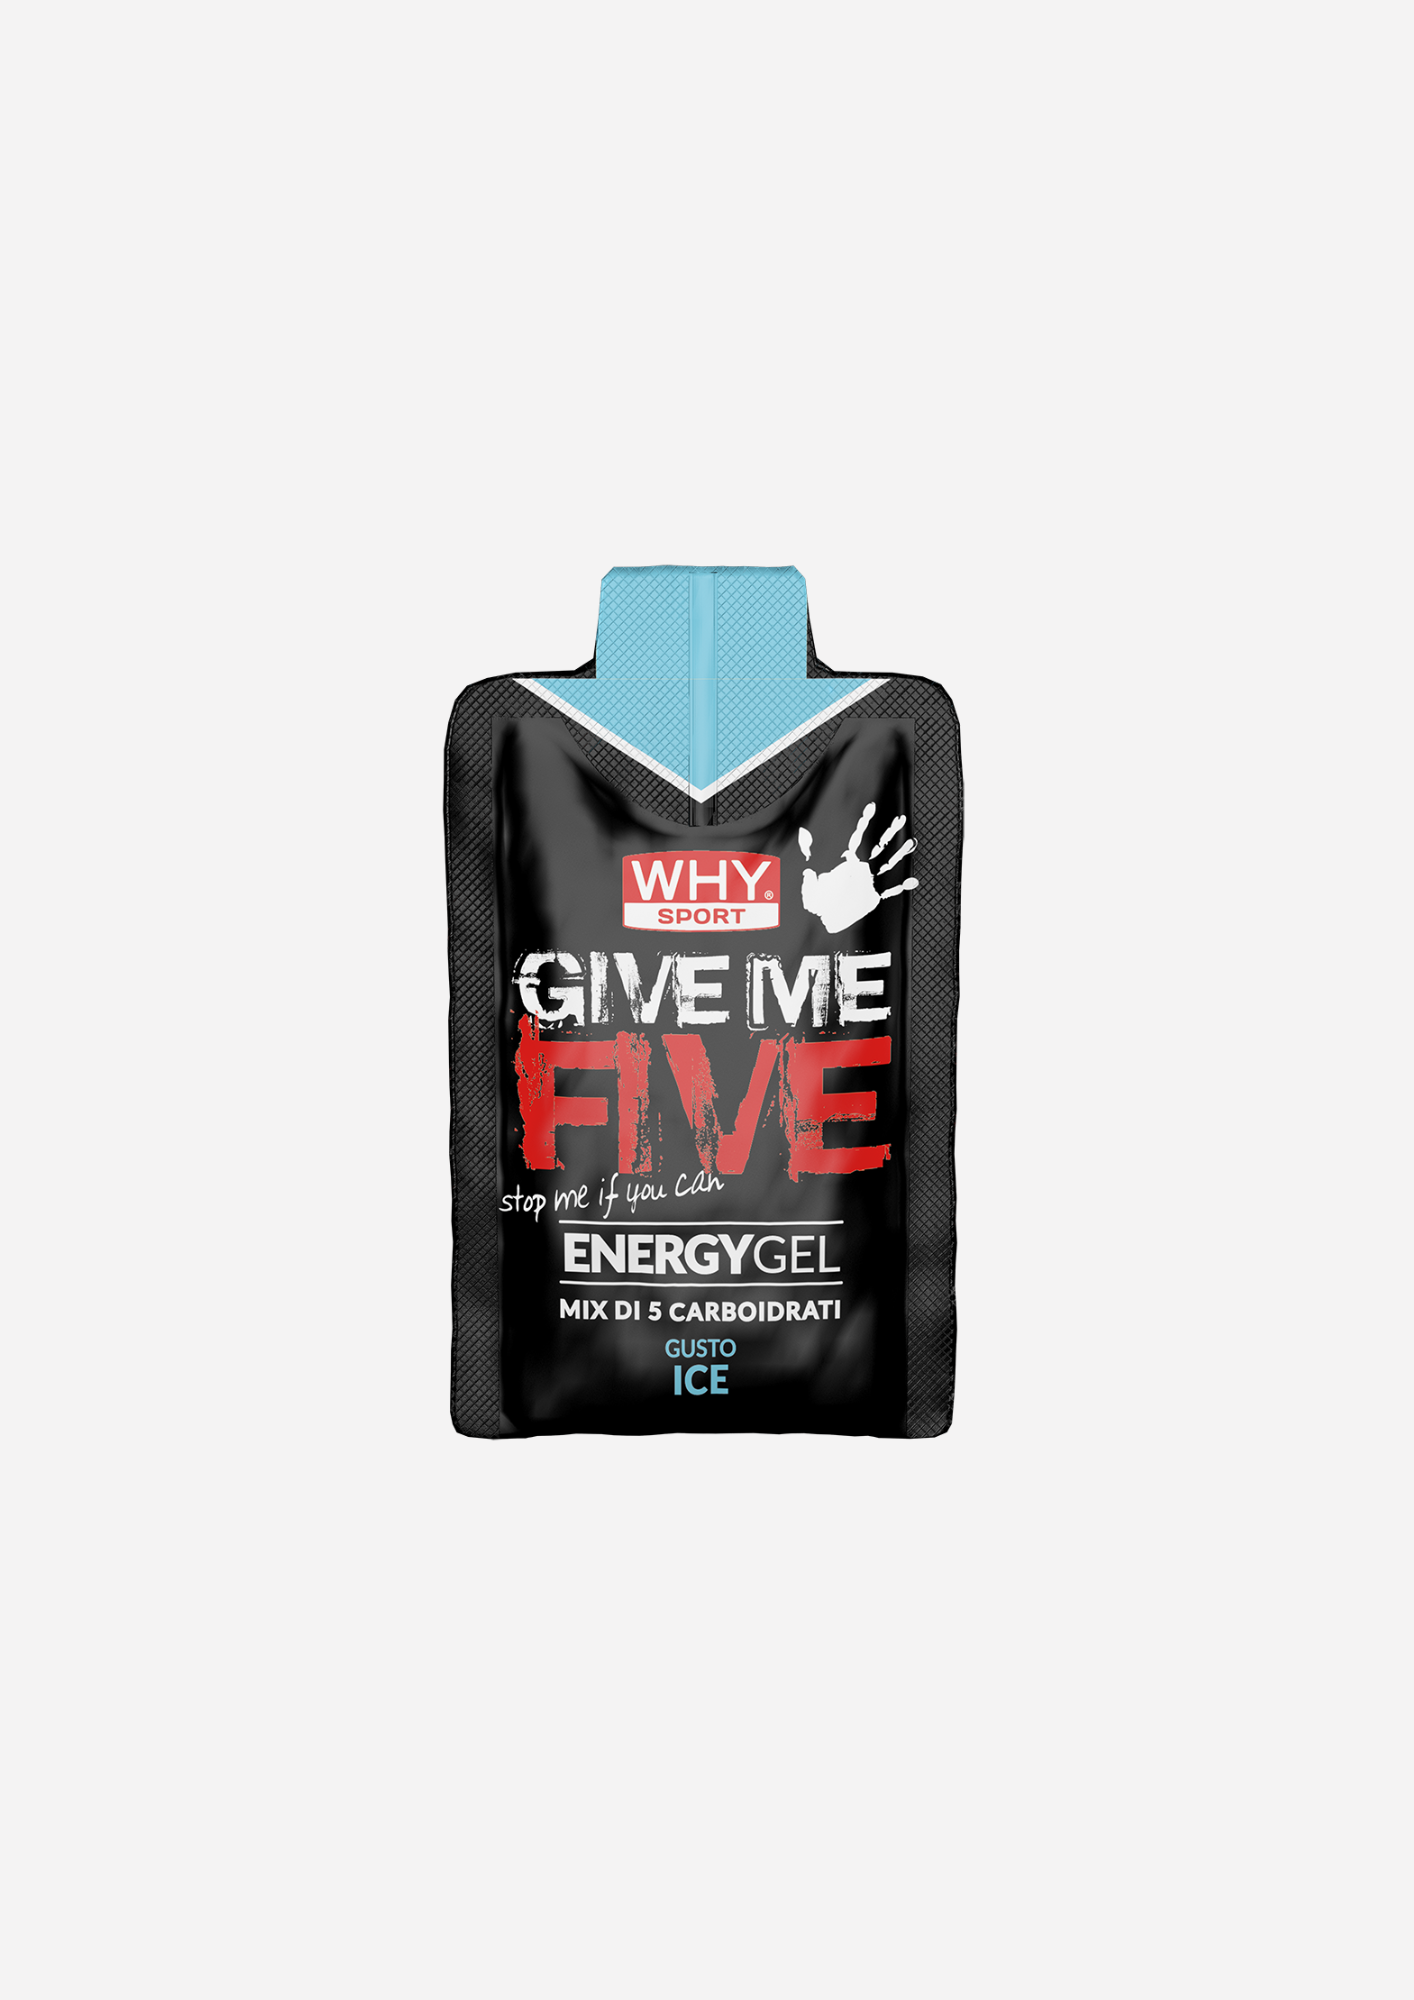 WHY SPORT - GIVE ME FIVE ENERGYGEL - 50 ml